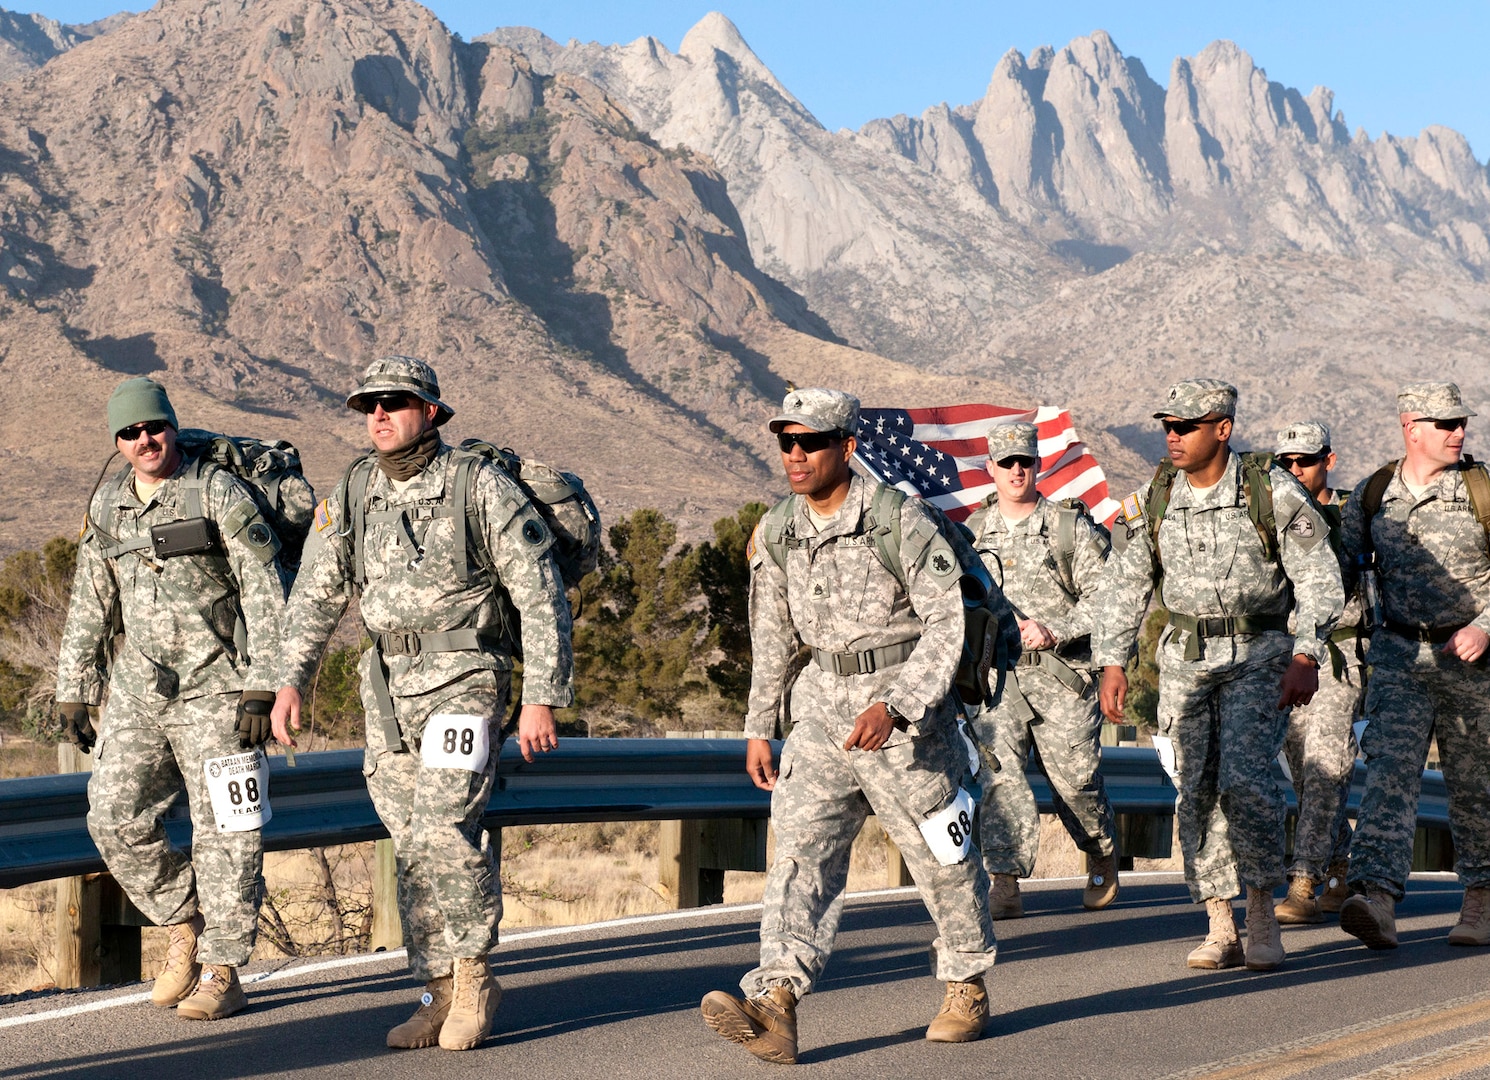 Three members of U.S. Army South’s 1st Battlefield Coordination Detachment lead the pack as they march along the highway during the 25th Bataan Memorial Death March at White Sands Missile Range, N.M. March 23. More than 25 Army South Soldiers participated in the Bataan MDM. Open To military and civilian teams and individuals in either heavy or light divisions, the Bataan Memorial Death March honors a special group of World War II heroes who were captured by Japanese forces and marched for days in the scorching heat through the Philippine jungles in 1942. Thirteen World War II Bataan veterans were in attendance to watch the march.
Photo by Robert R. Ramon